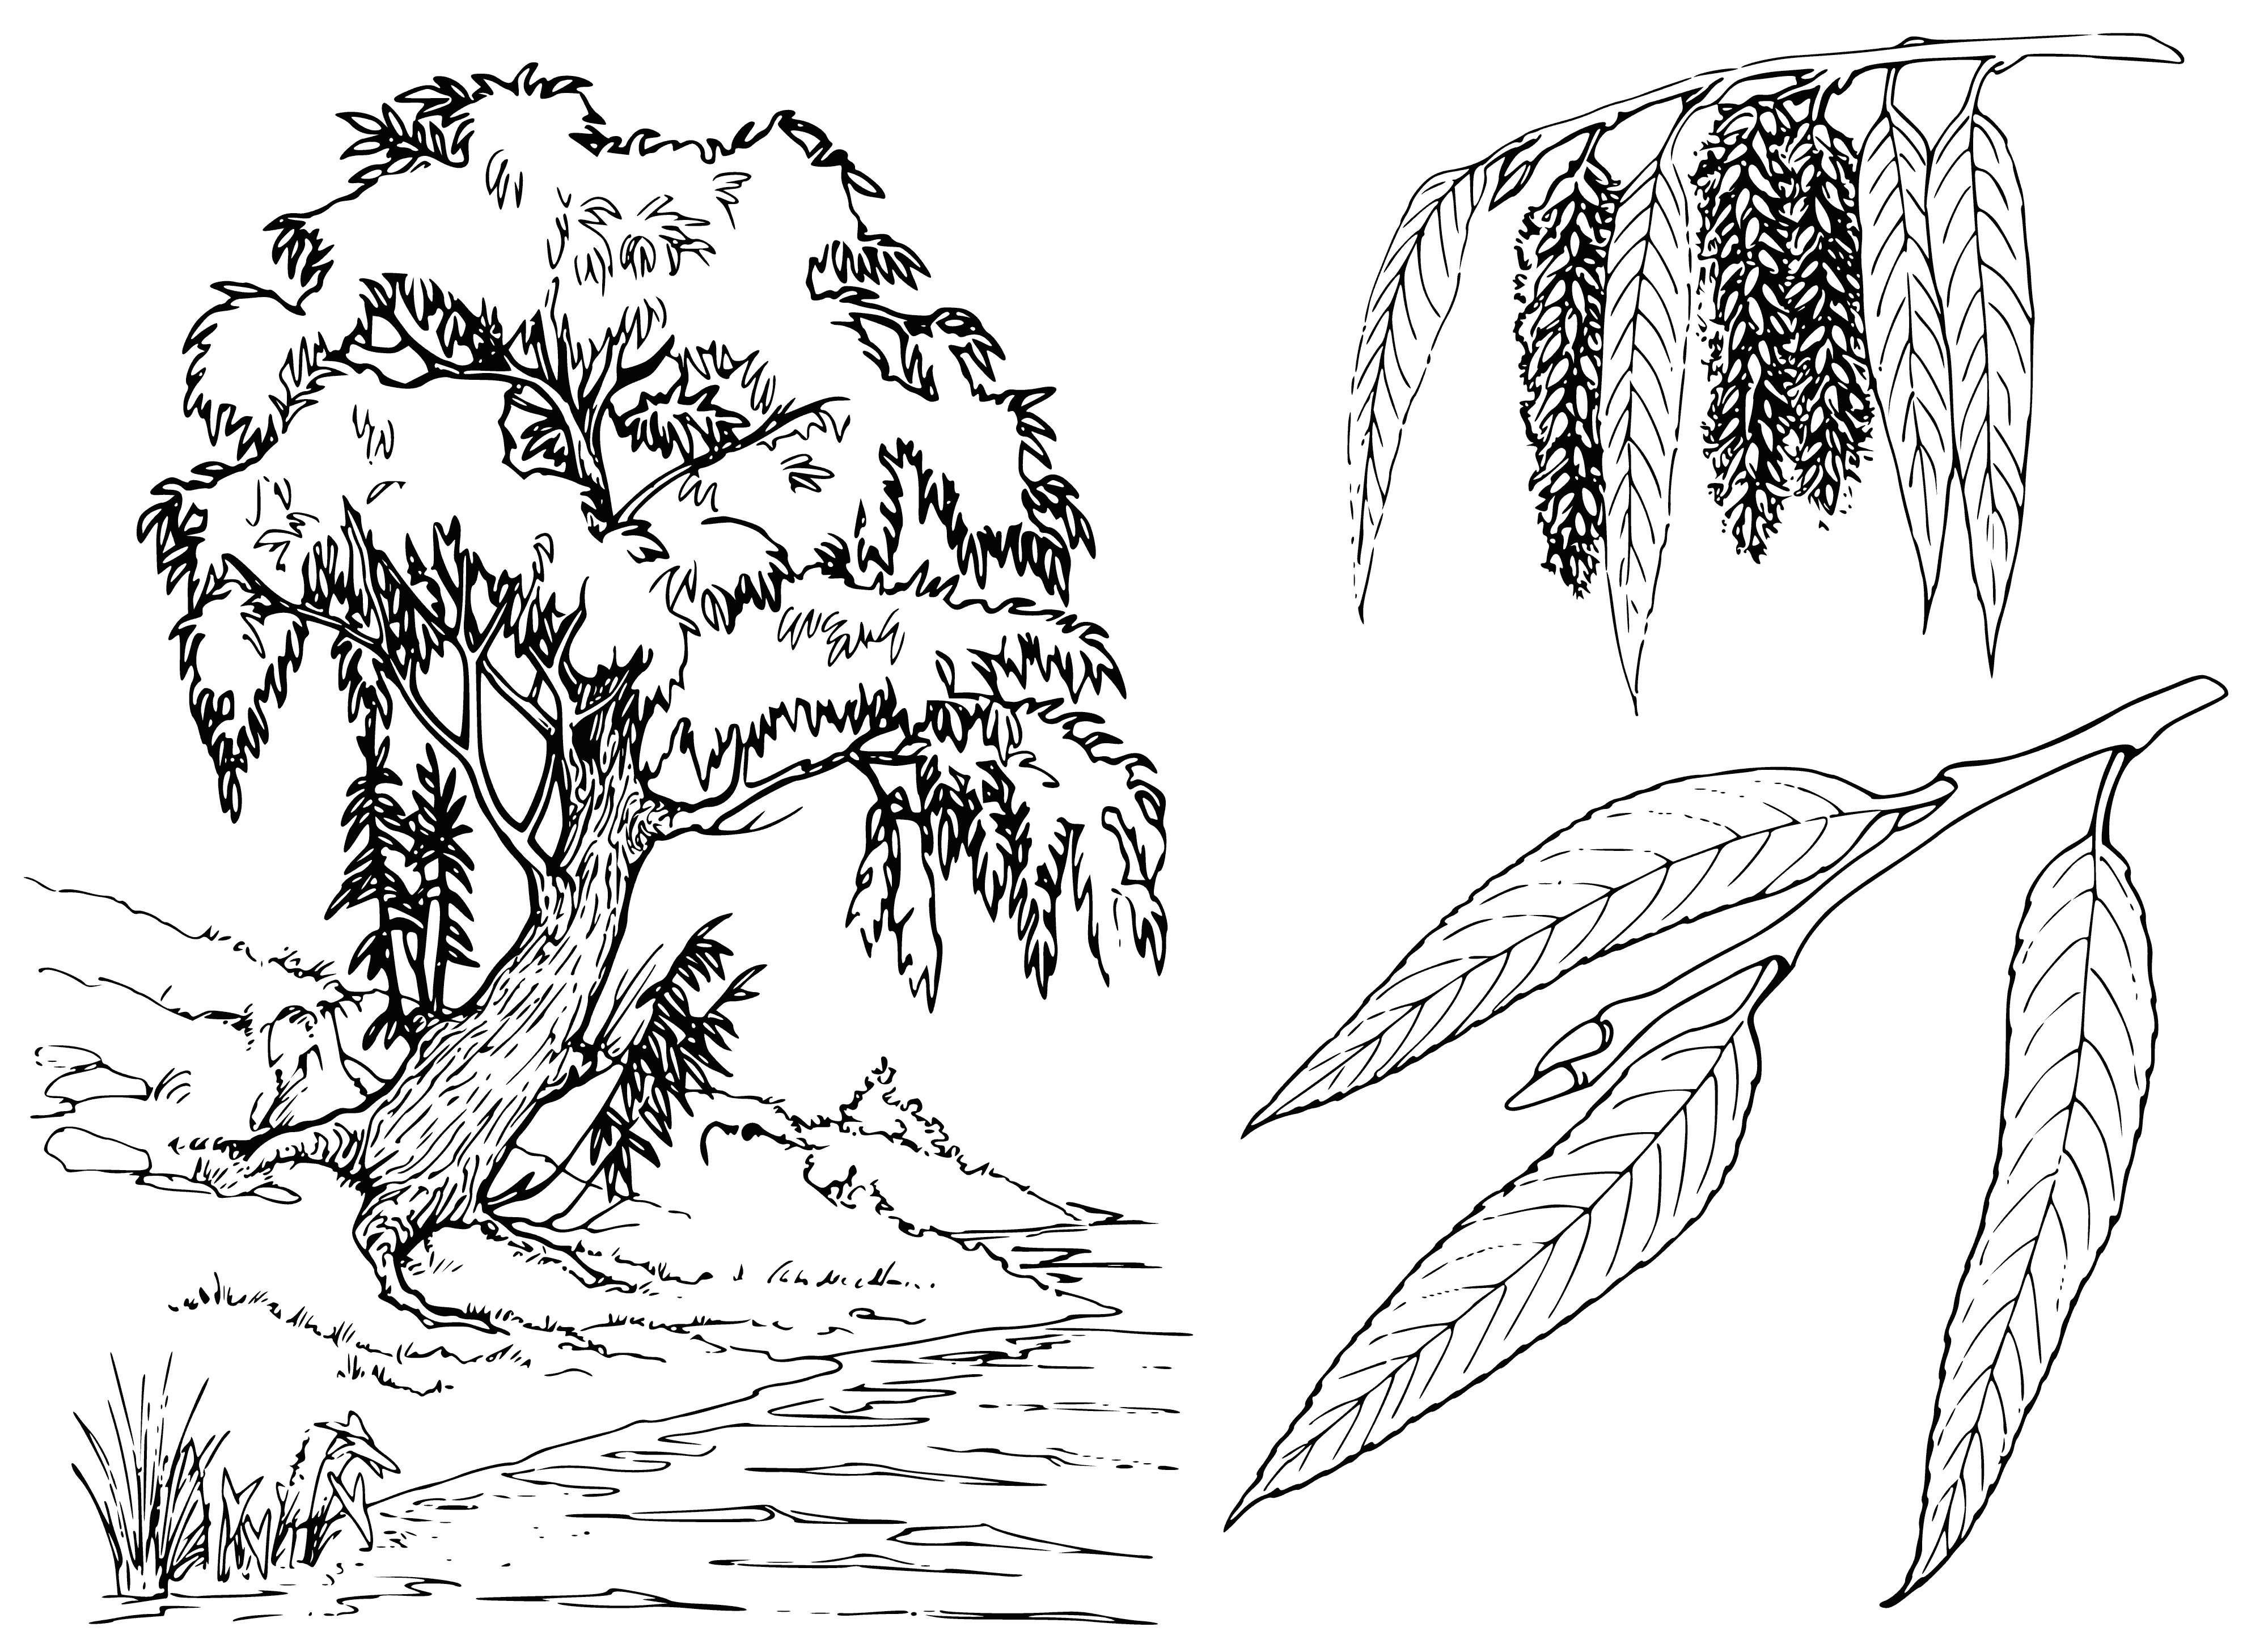 coloring page: Trees are willow w/ long, slim trunks/branches. Leaves are light green, branches dark brown. Trees grow close together, roots visible in ground.